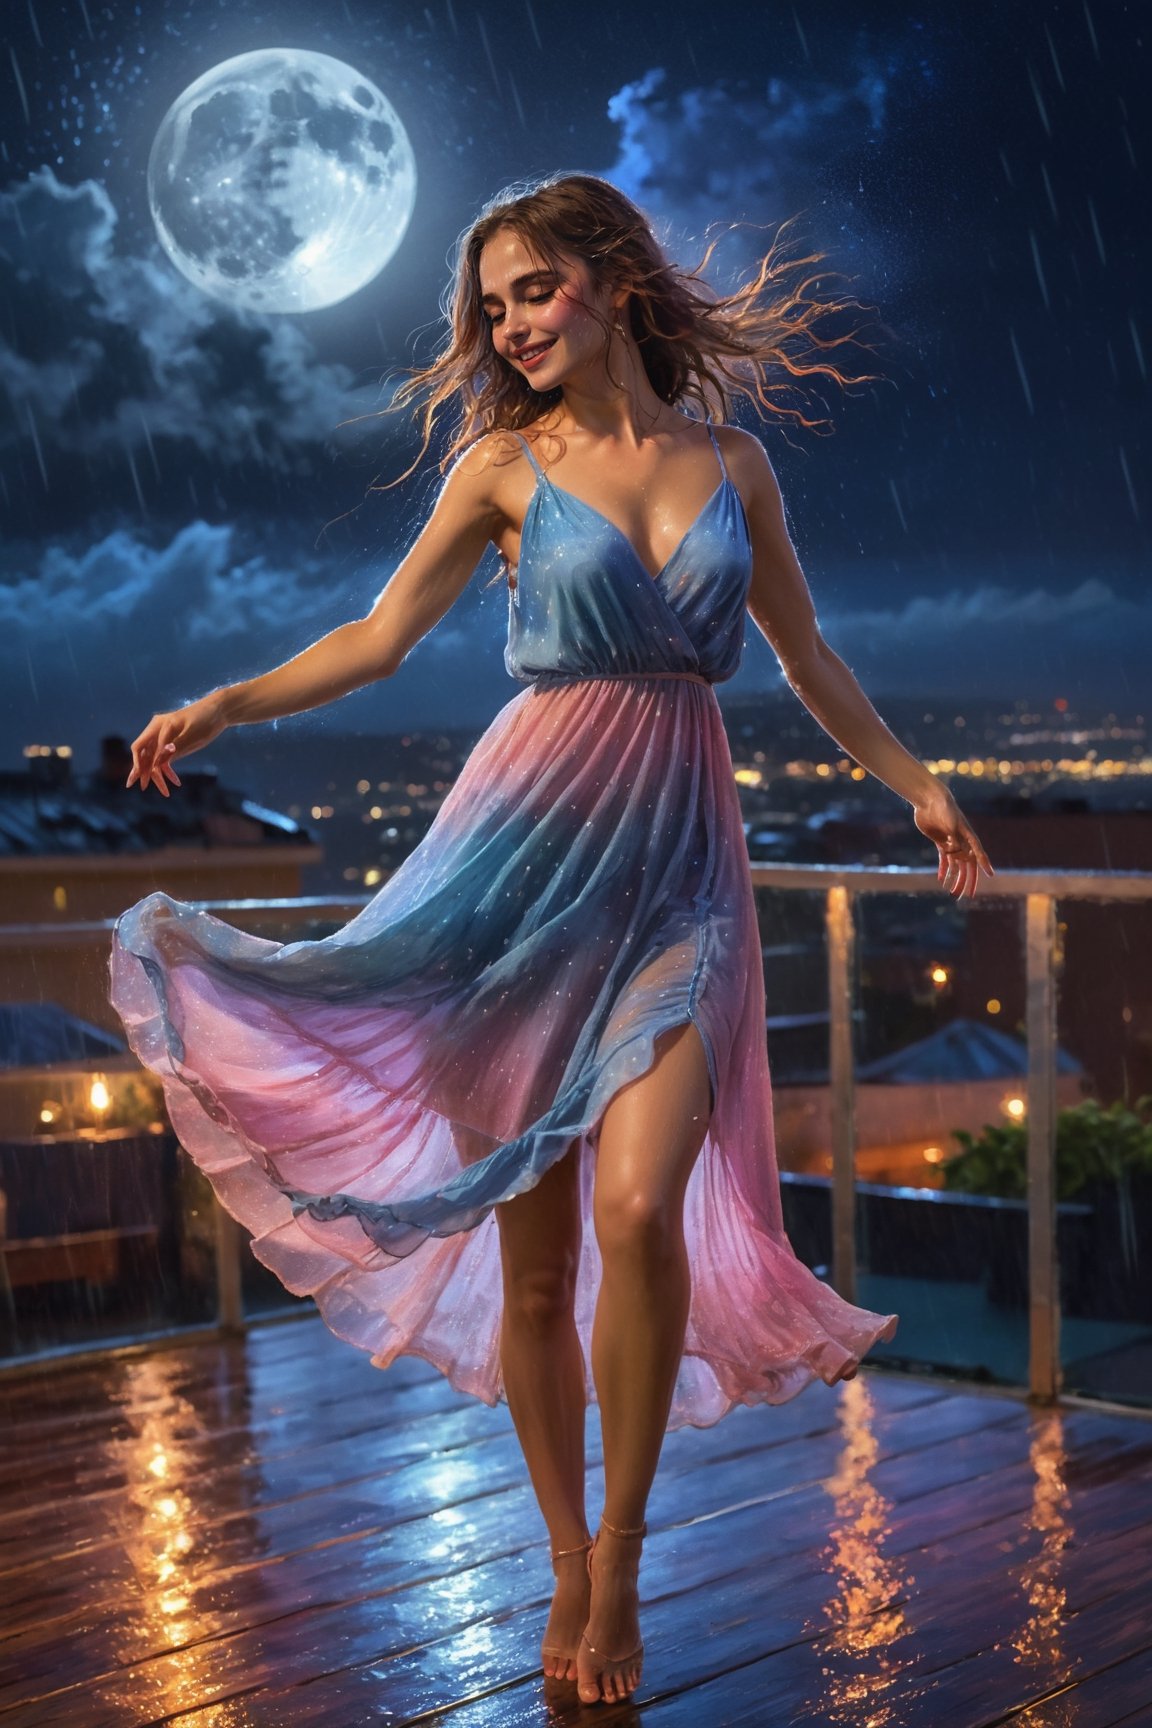  Nighttime, Urban Rooftop, Woman (in a flowing dress), Dancing, Romantic Atmosphere, Rainfall, City Lights in the Background, Soft Moonlight, Digital Art, Impressionistic Style, Photoshop, Digital Painting, High Resolution, Vibrant Color Palette, Subtle Glowing Effects, Moody Ambiance, Skillful Artist, Fine Details, Surreal Feel, Dreamlike Composition.,more detail XL